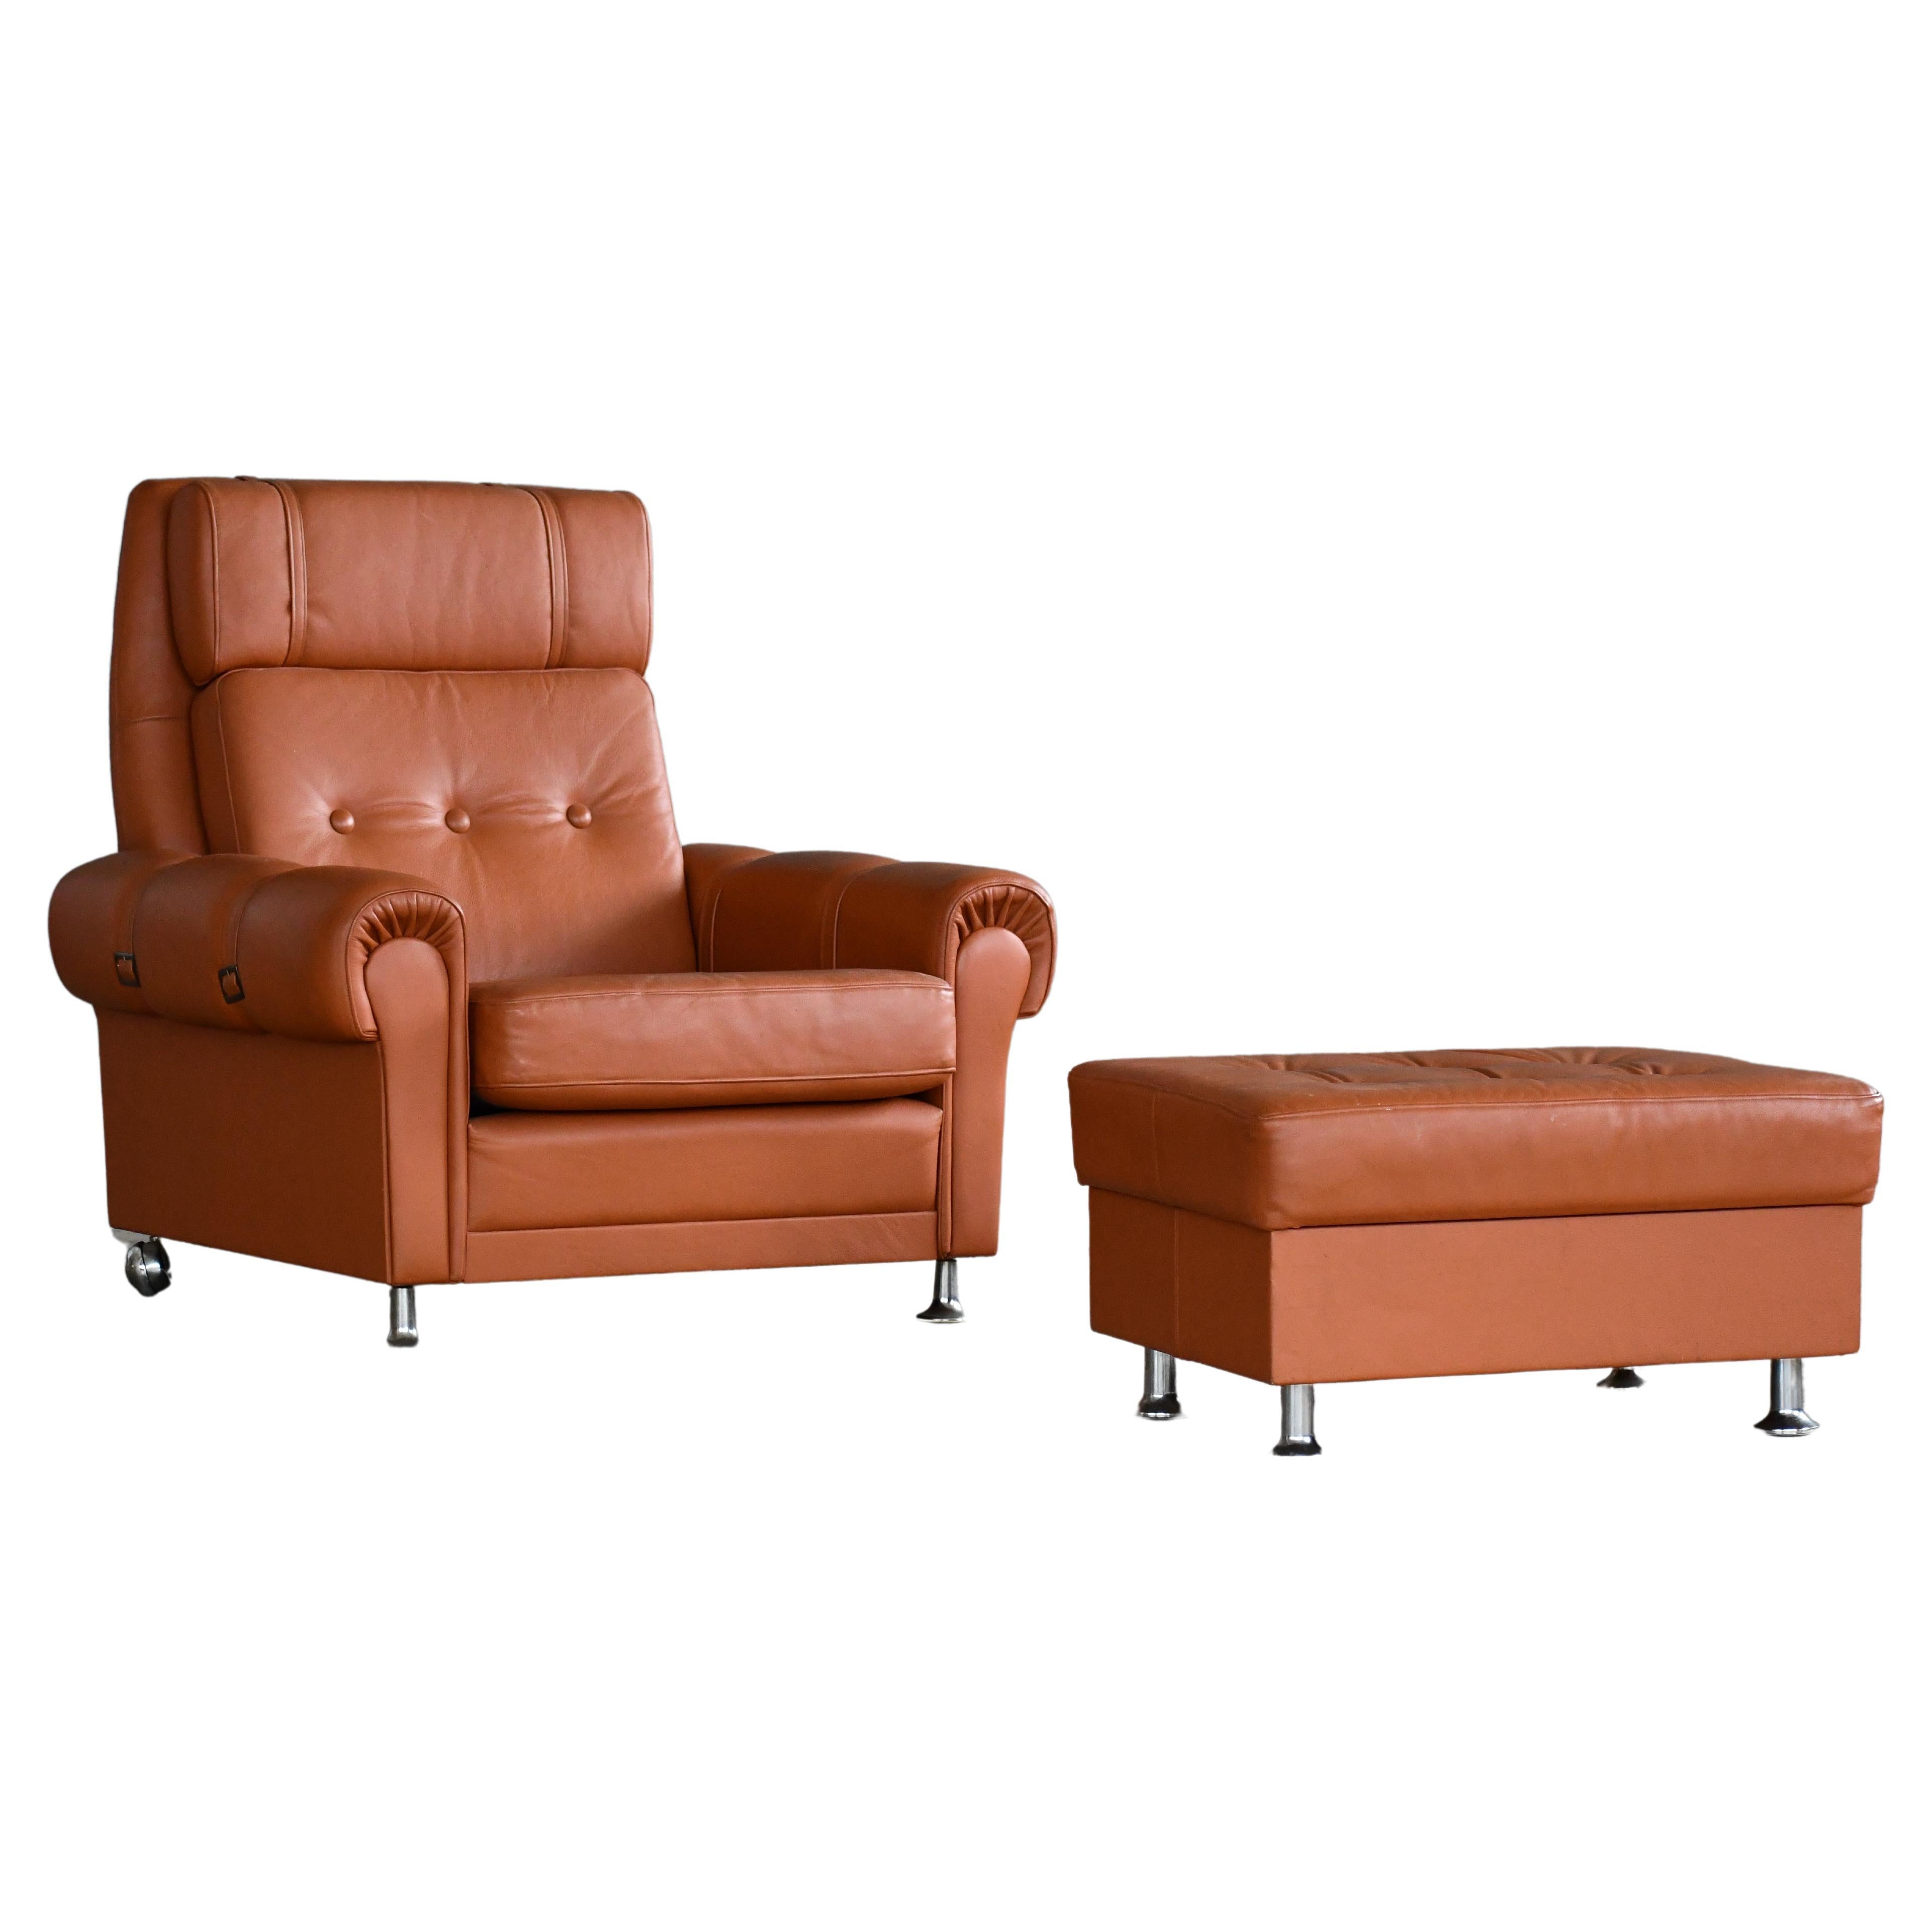 Illum Wikkelsø Style Leather Lounge Chair with Ottoman Cognac Colored Leather  For Sale